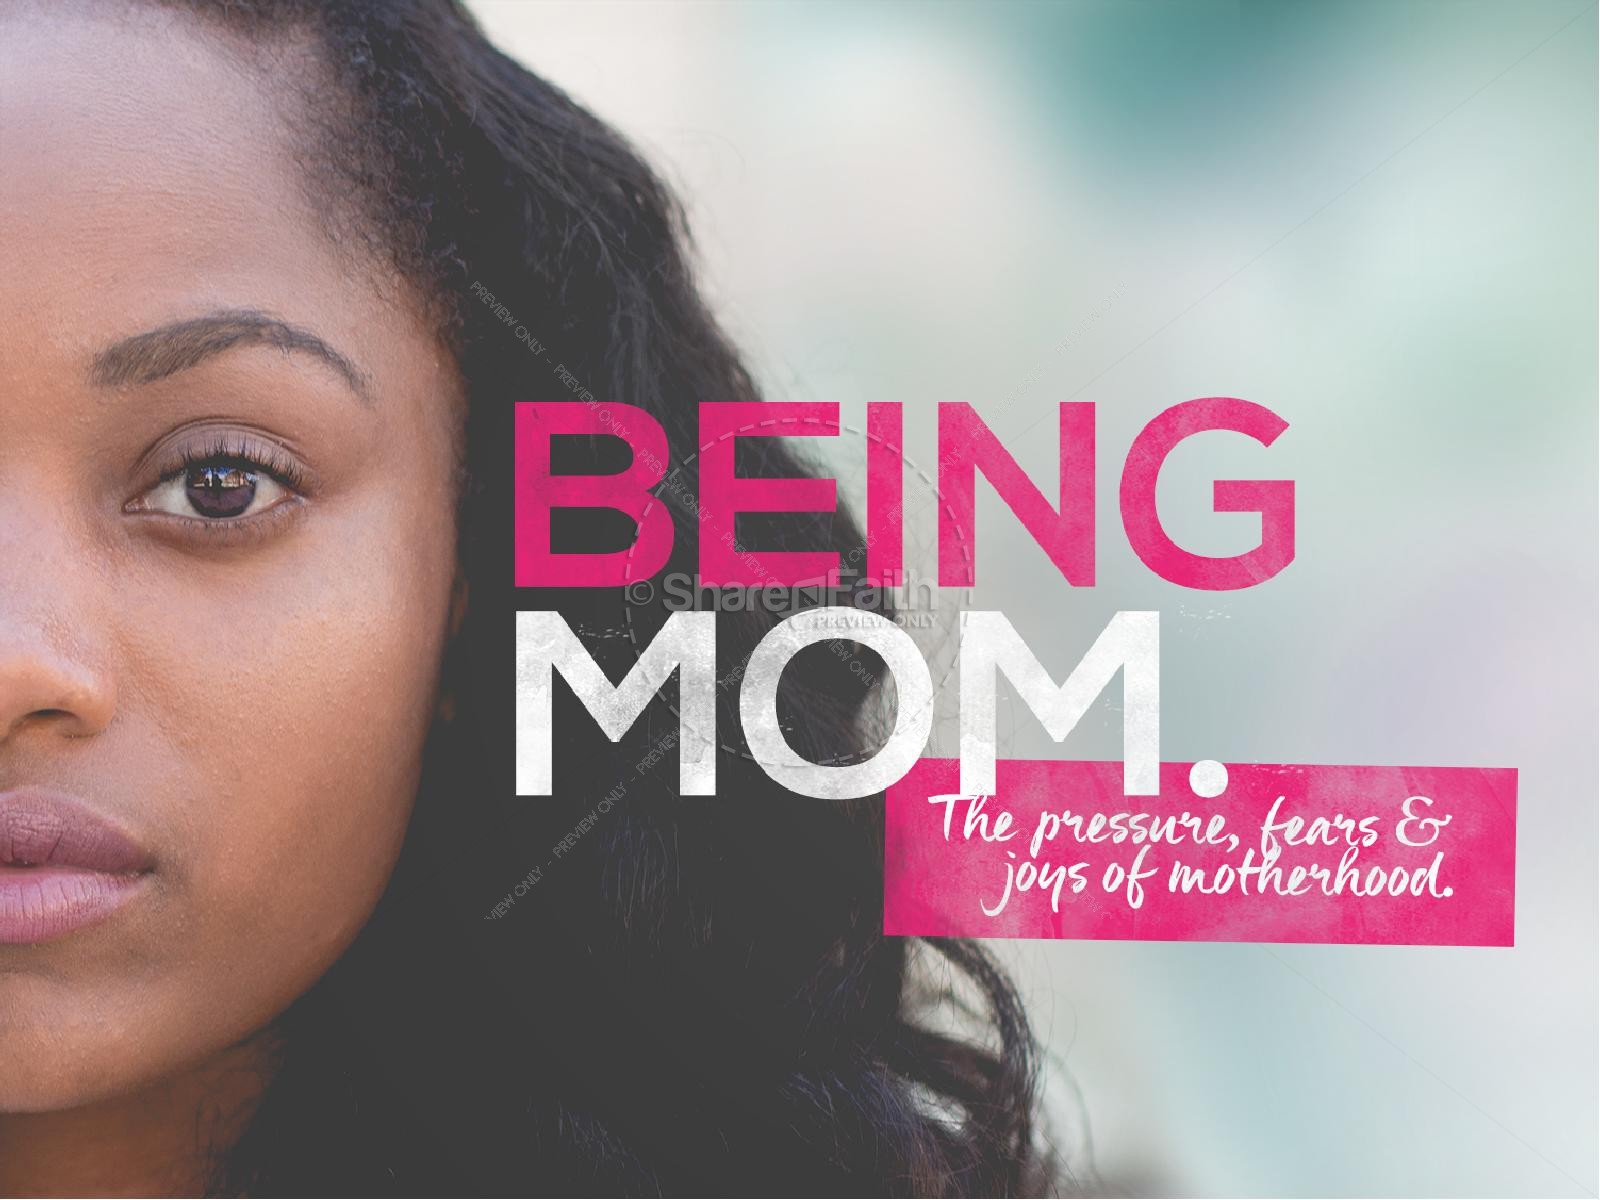 Being Mom Mother's Day Sermon PowerPoint Thumbnail 1